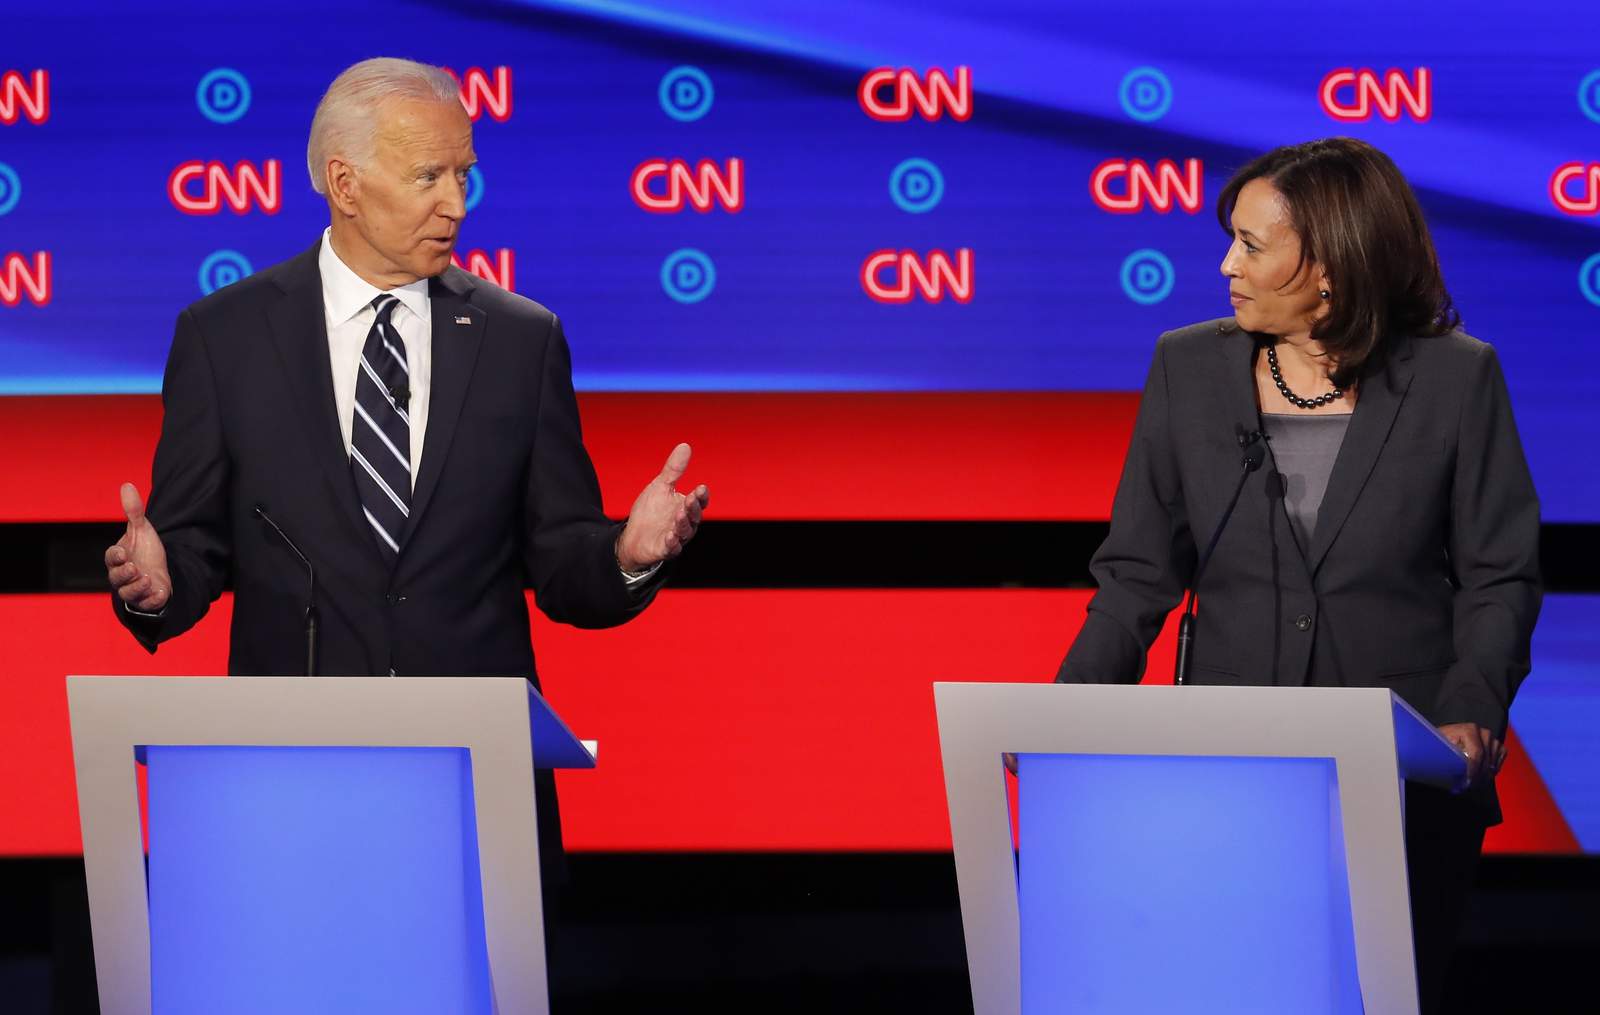 Tears in my eyes.: Houston and Texas leaders react to Biden-Harris run in 2020 election